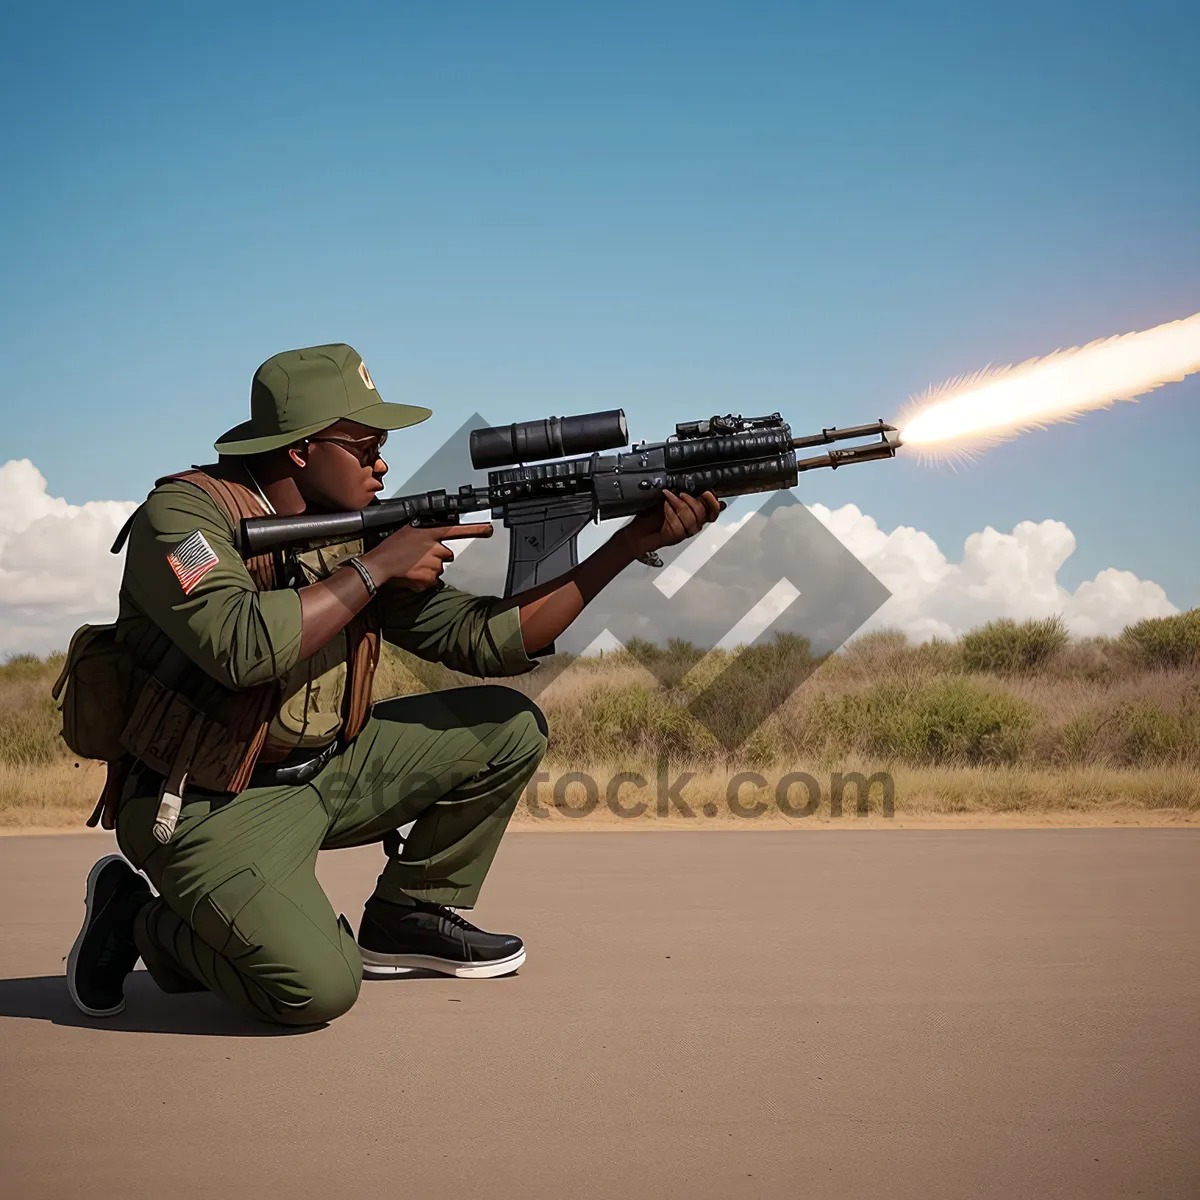 Picture of Combat-ready soldier armed with advanced weaponry